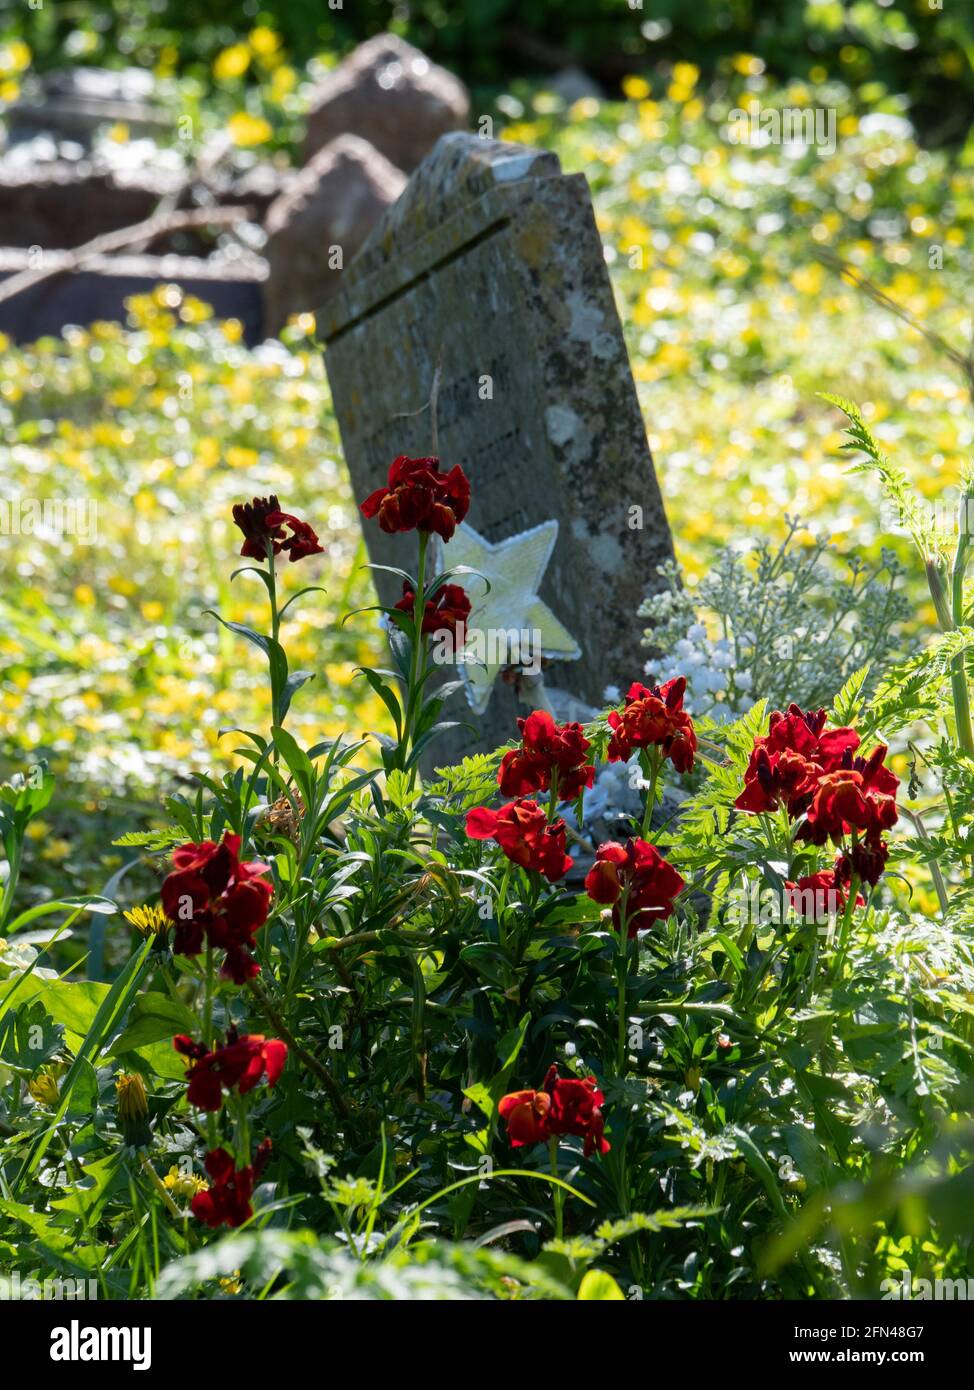 An angled headstone fronted by a yellow star and red bleeding heart flowers. Stock Photo